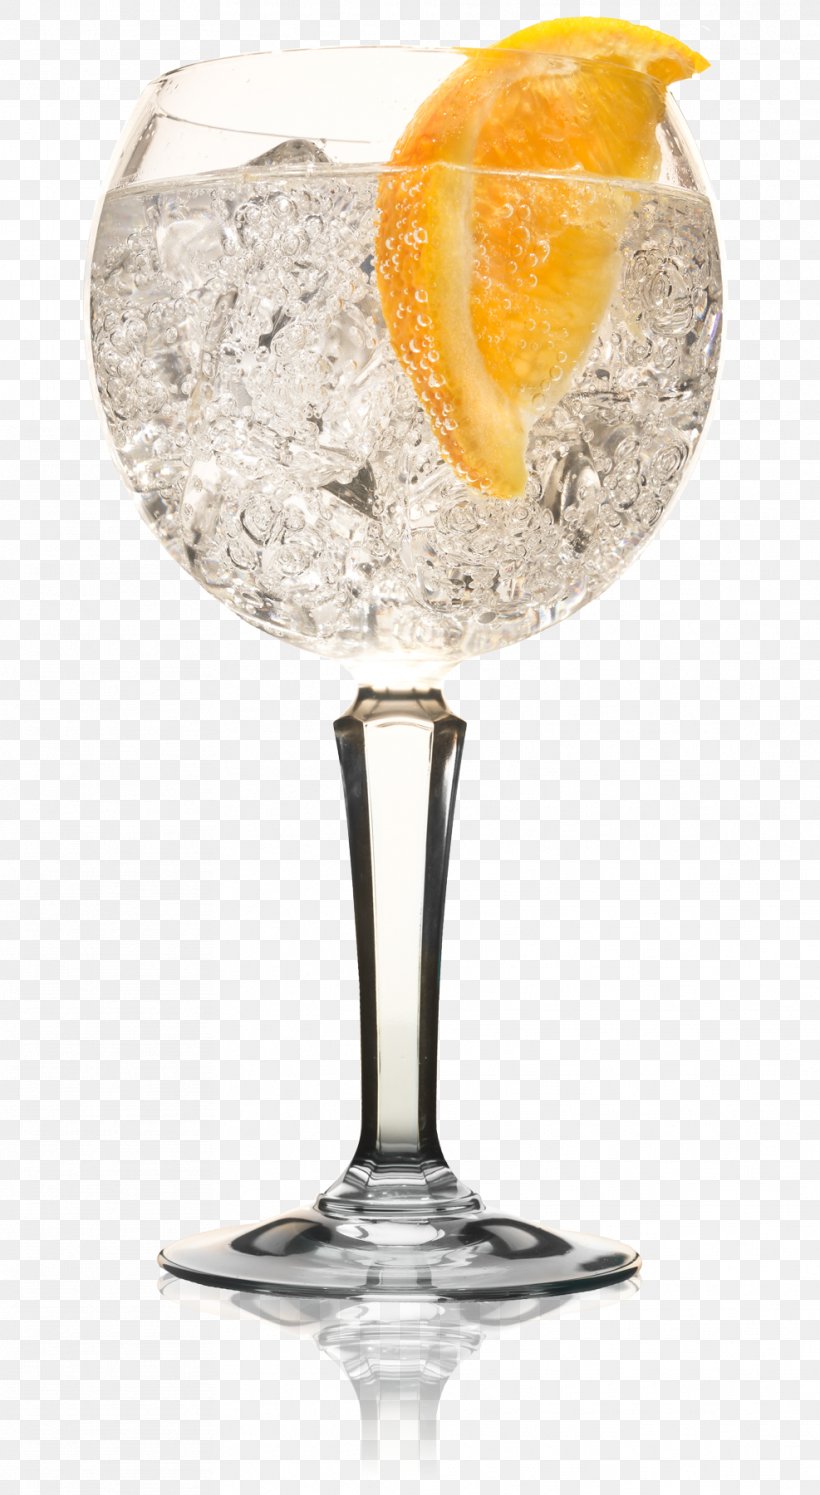 Cocktail Garnish Gin And Tonic Wine Cocktail Champagne Cocktail Vodka Tonic, PNG, 987x1800px, Cocktail Garnish, Champagne, Champagne Cocktail, Champagne Glass, Champagne Stemware Download Free